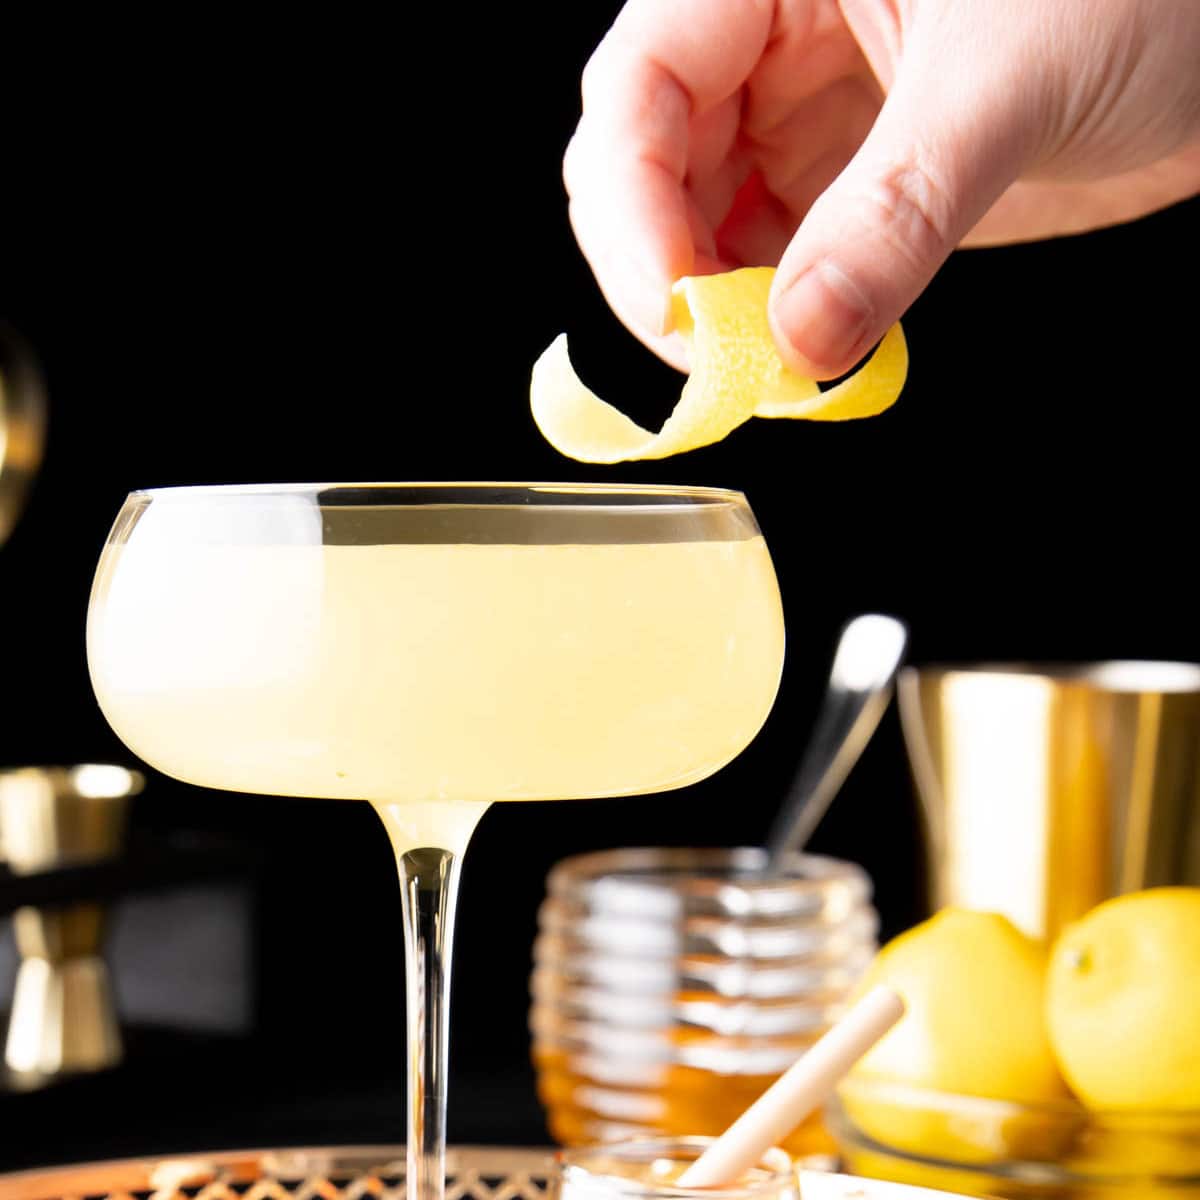 Hand adding a garnish to a Bee's Knees cocktail served in a cocktail glass